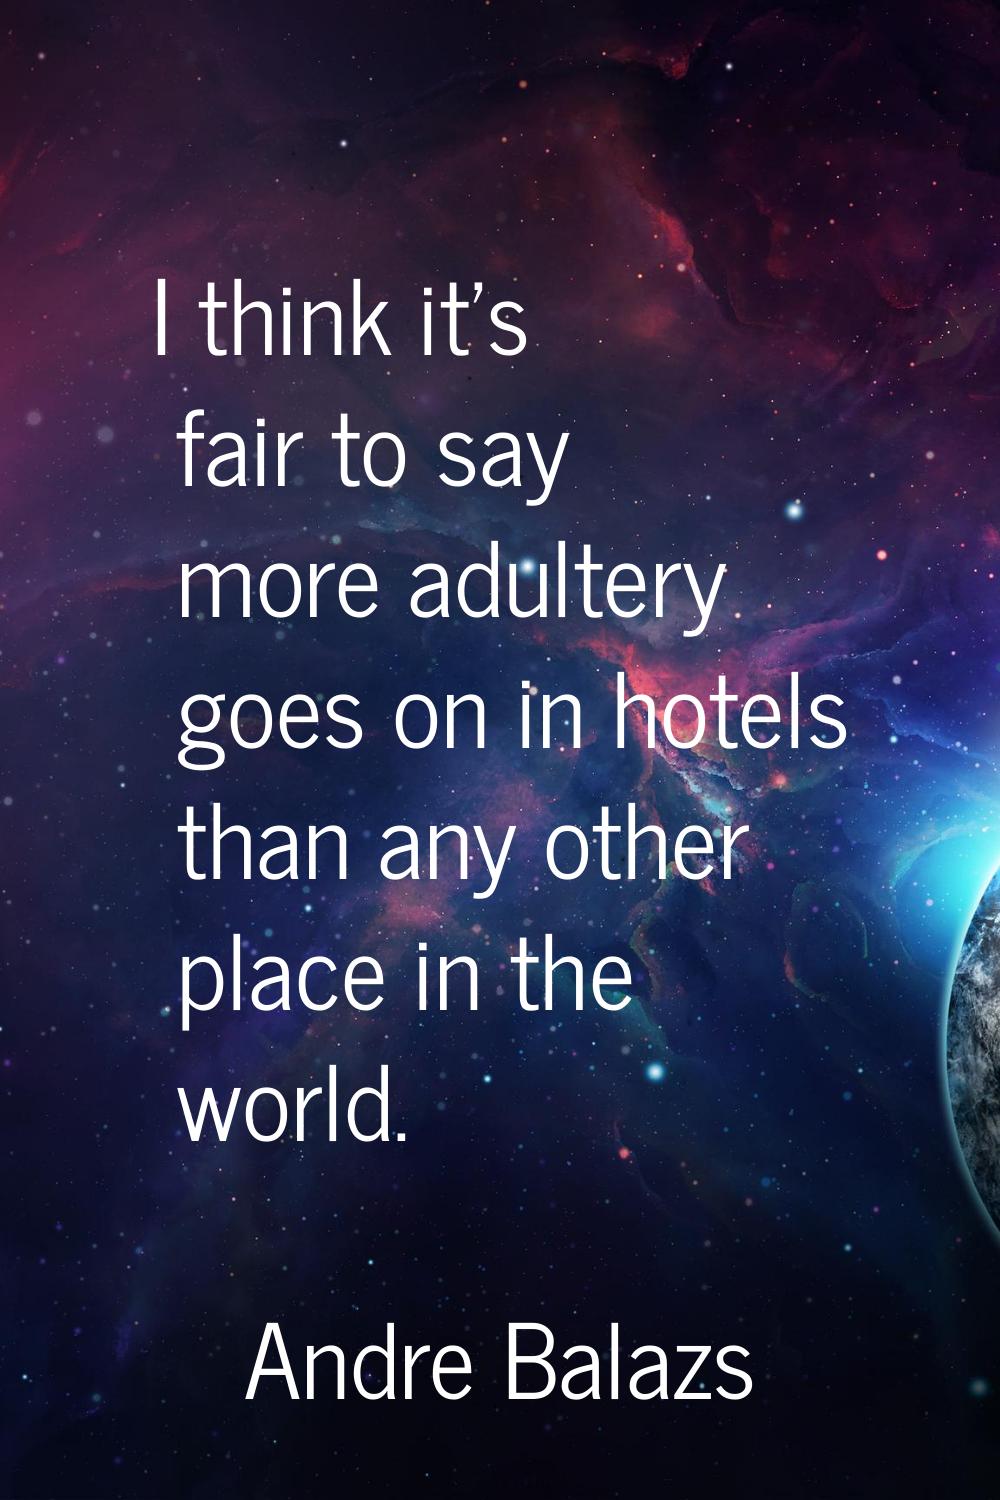 I think it's fair to say more adultery goes on in hotels than any other place in the world.